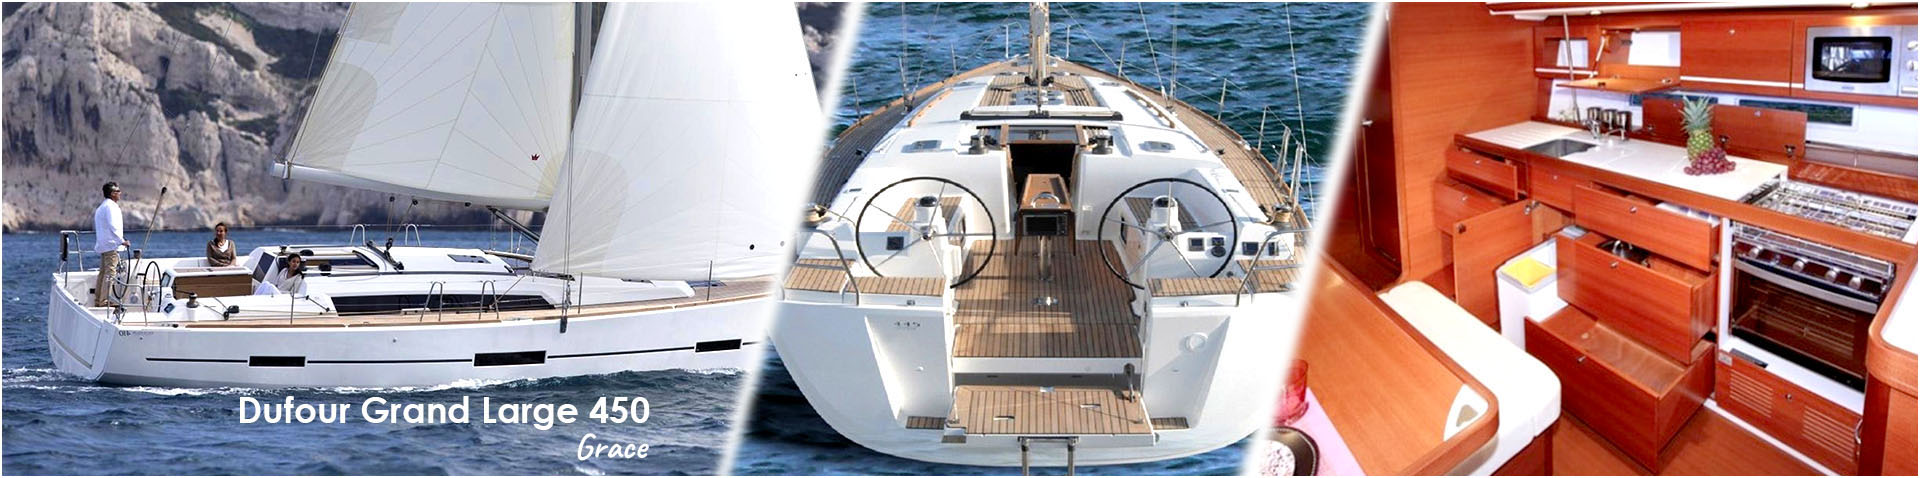 dufour grand large 450 Grace yacht charter